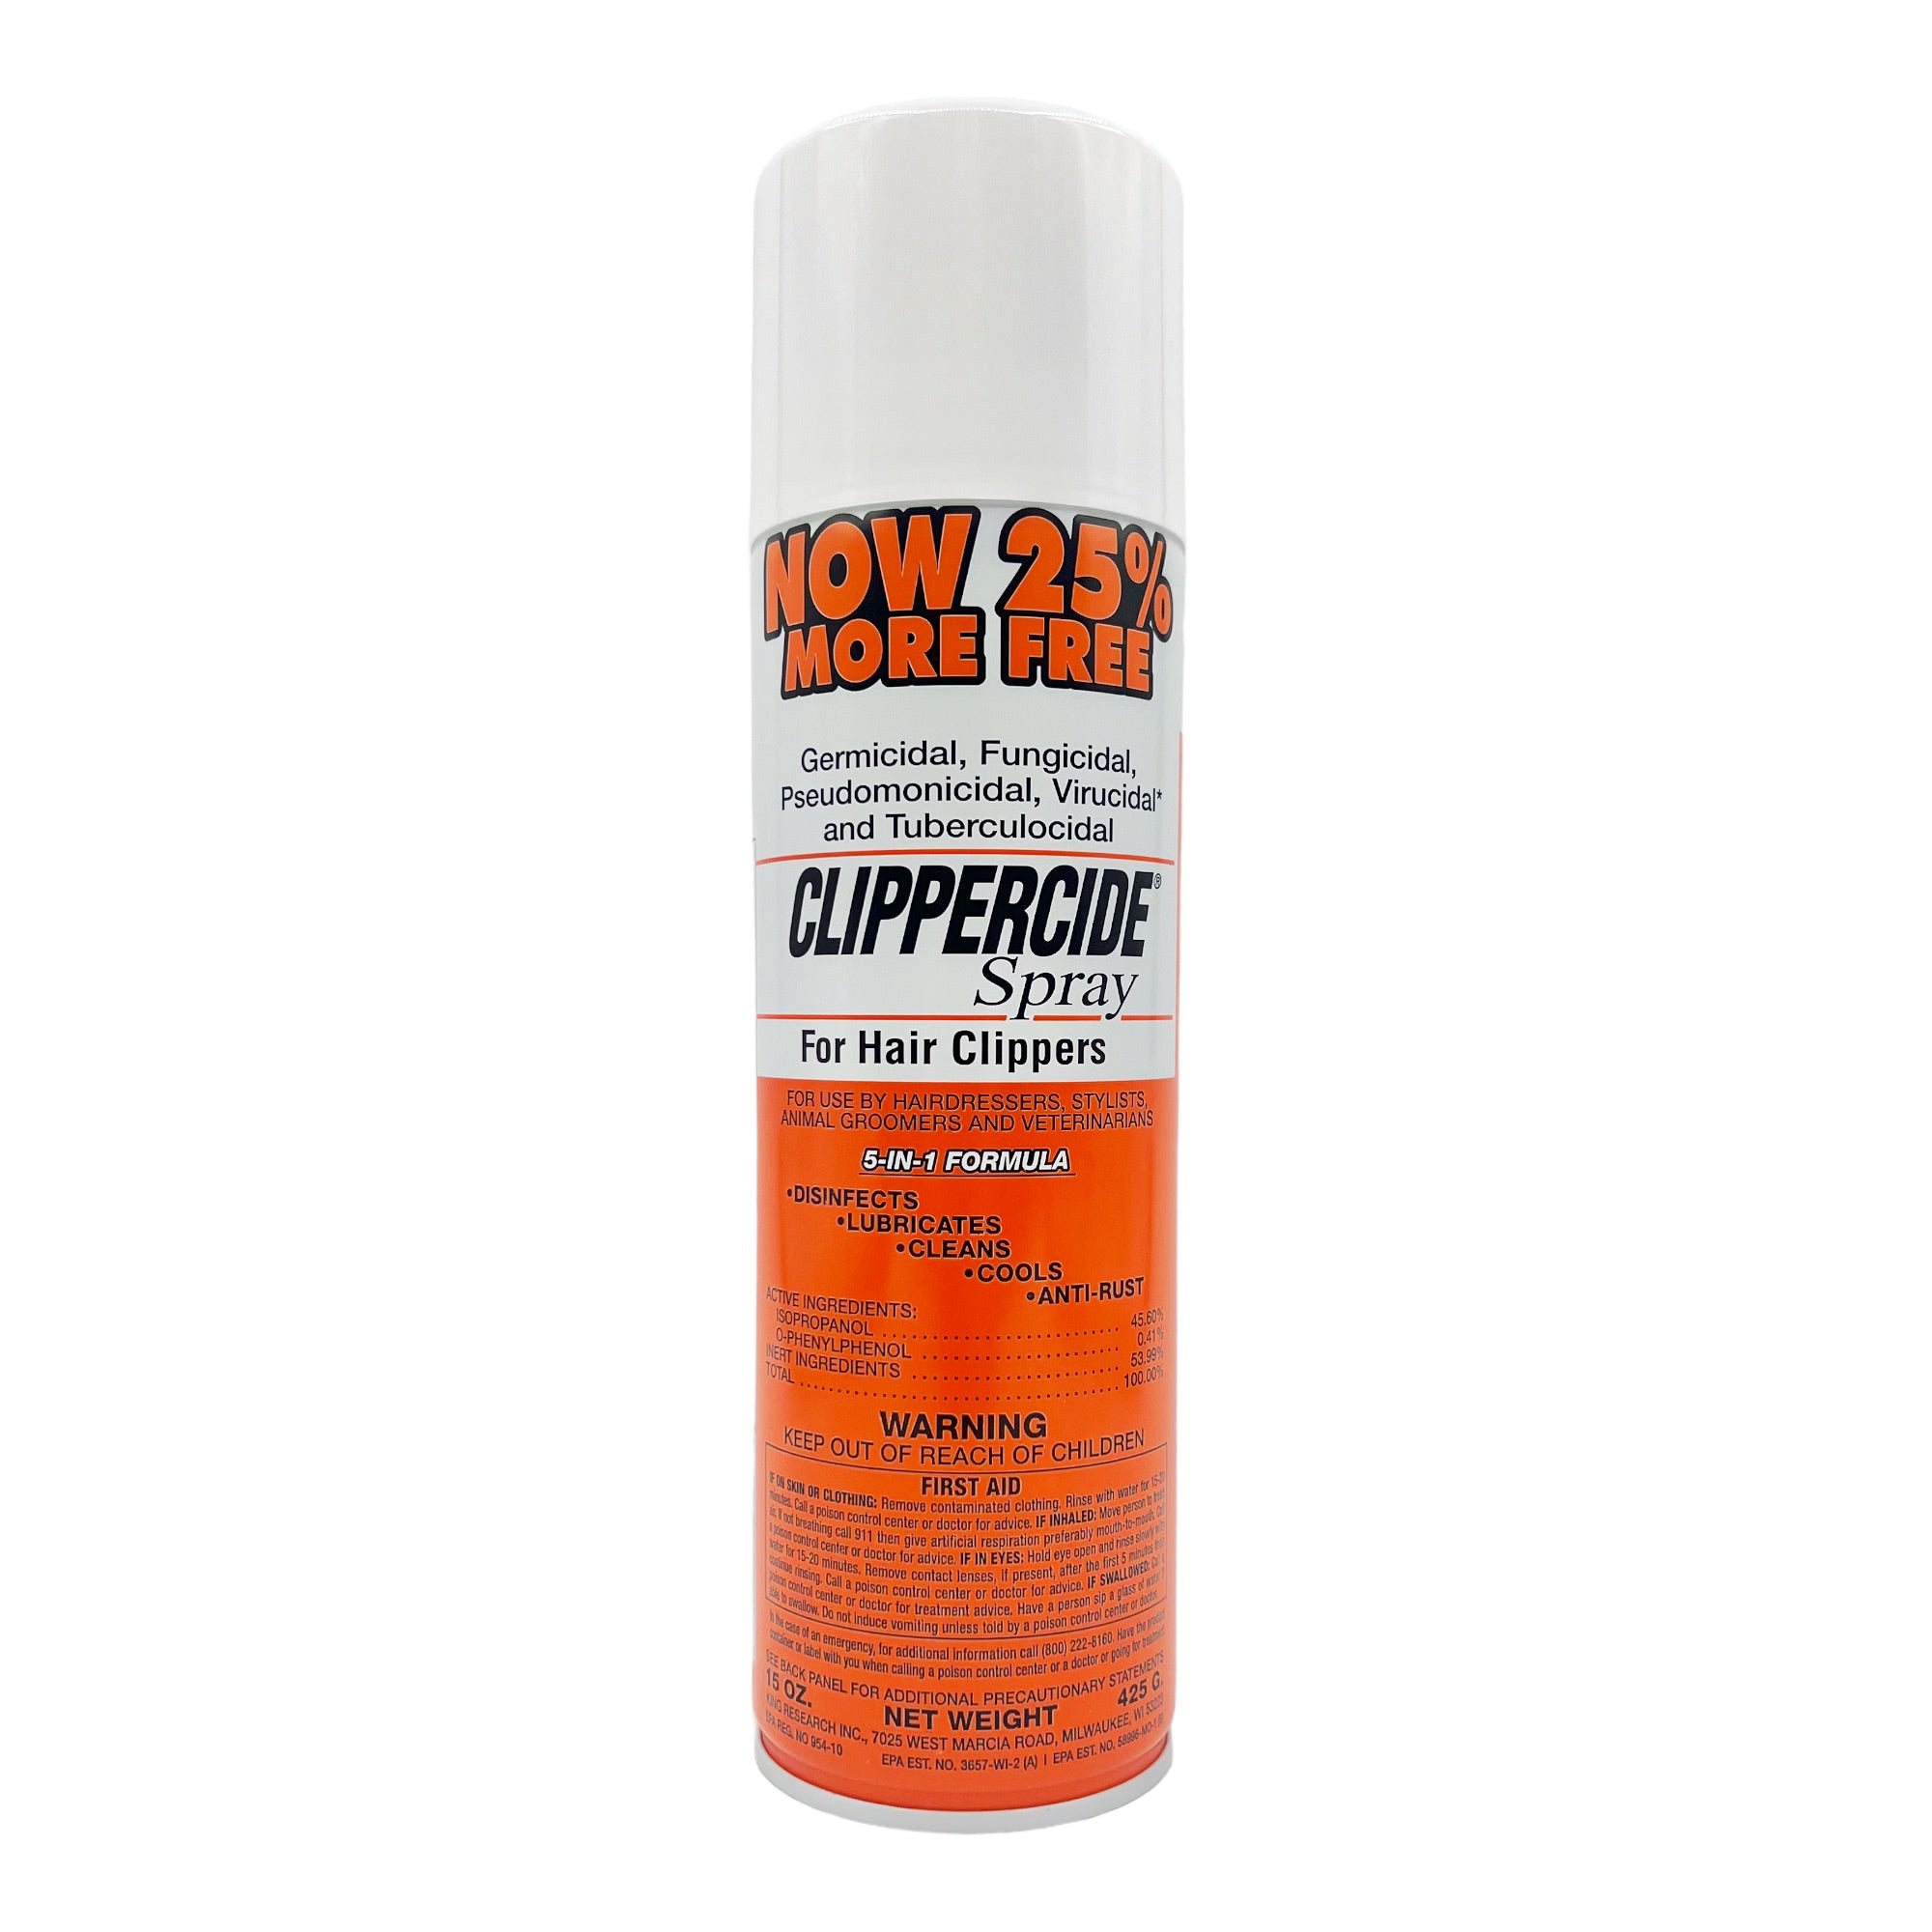 Clippercide - Spray for Hair Clippers 5-in-1 Formula 425g - Eson Direct